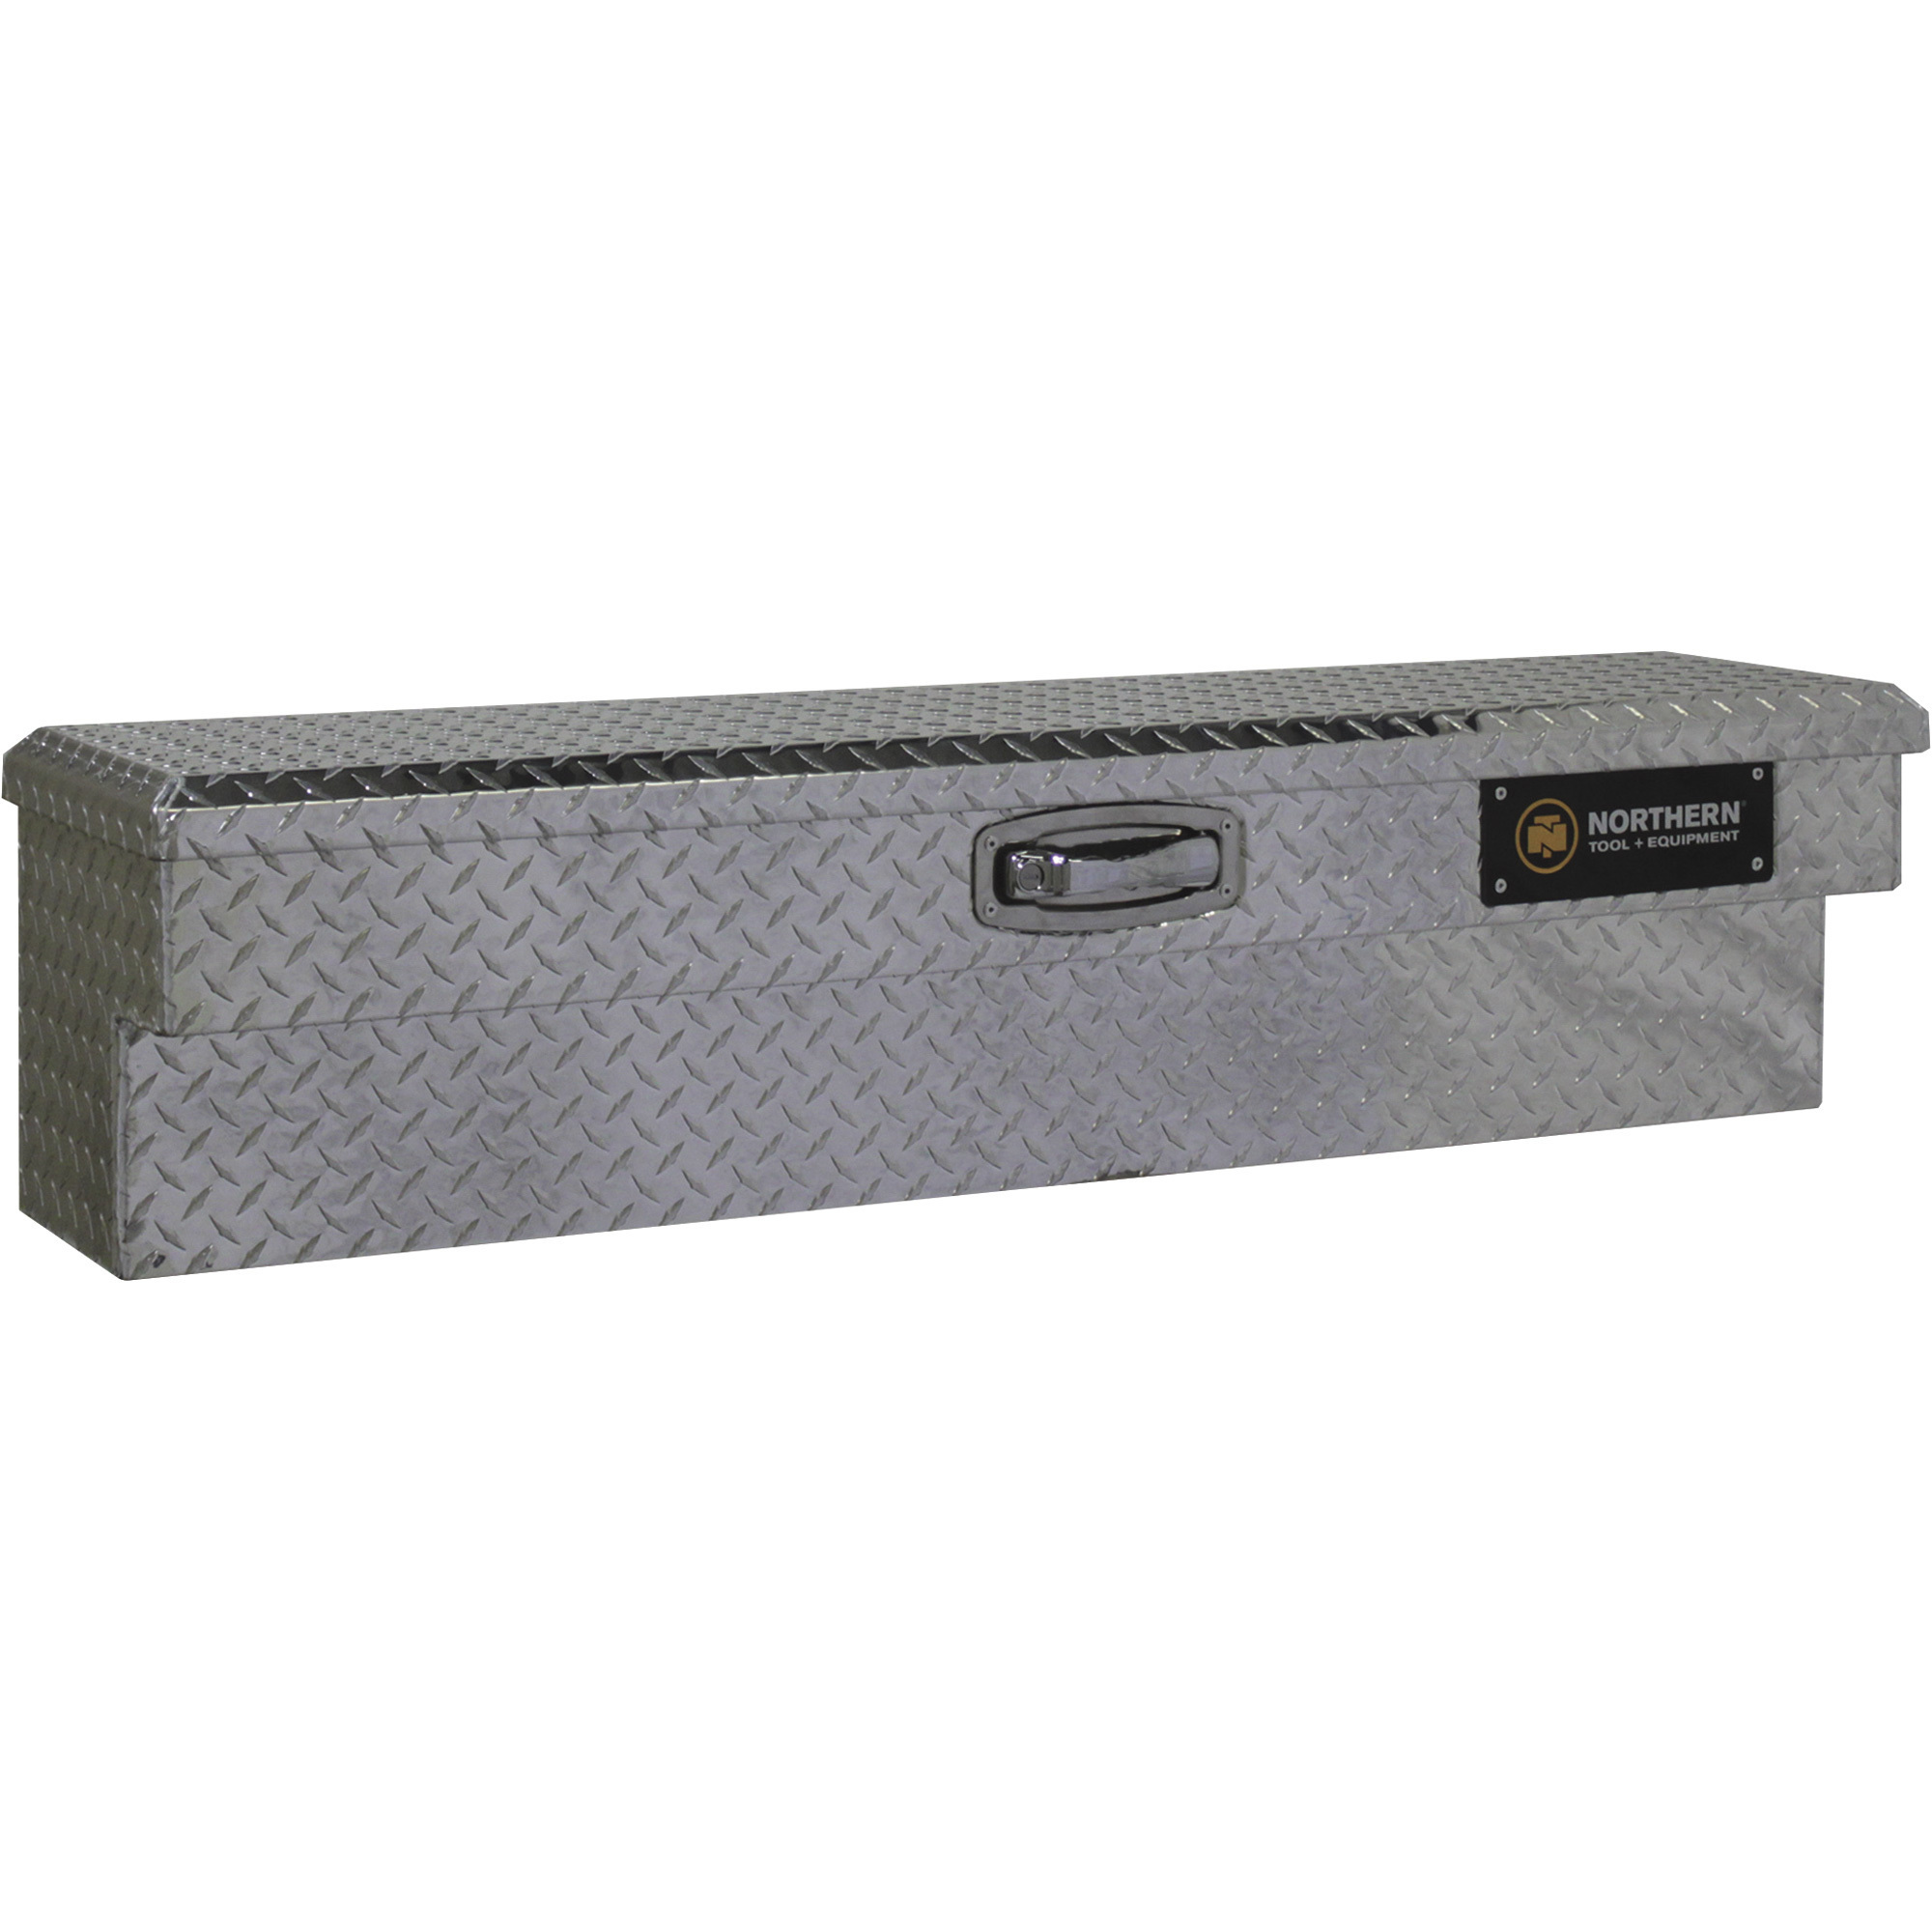 Northern Tool Side-Mount Truck Tool Box, Aluminum, Diamond Plate, Pull Handle Latch, 48Inch x 11.5Inch x 11Inch, Model 36012757